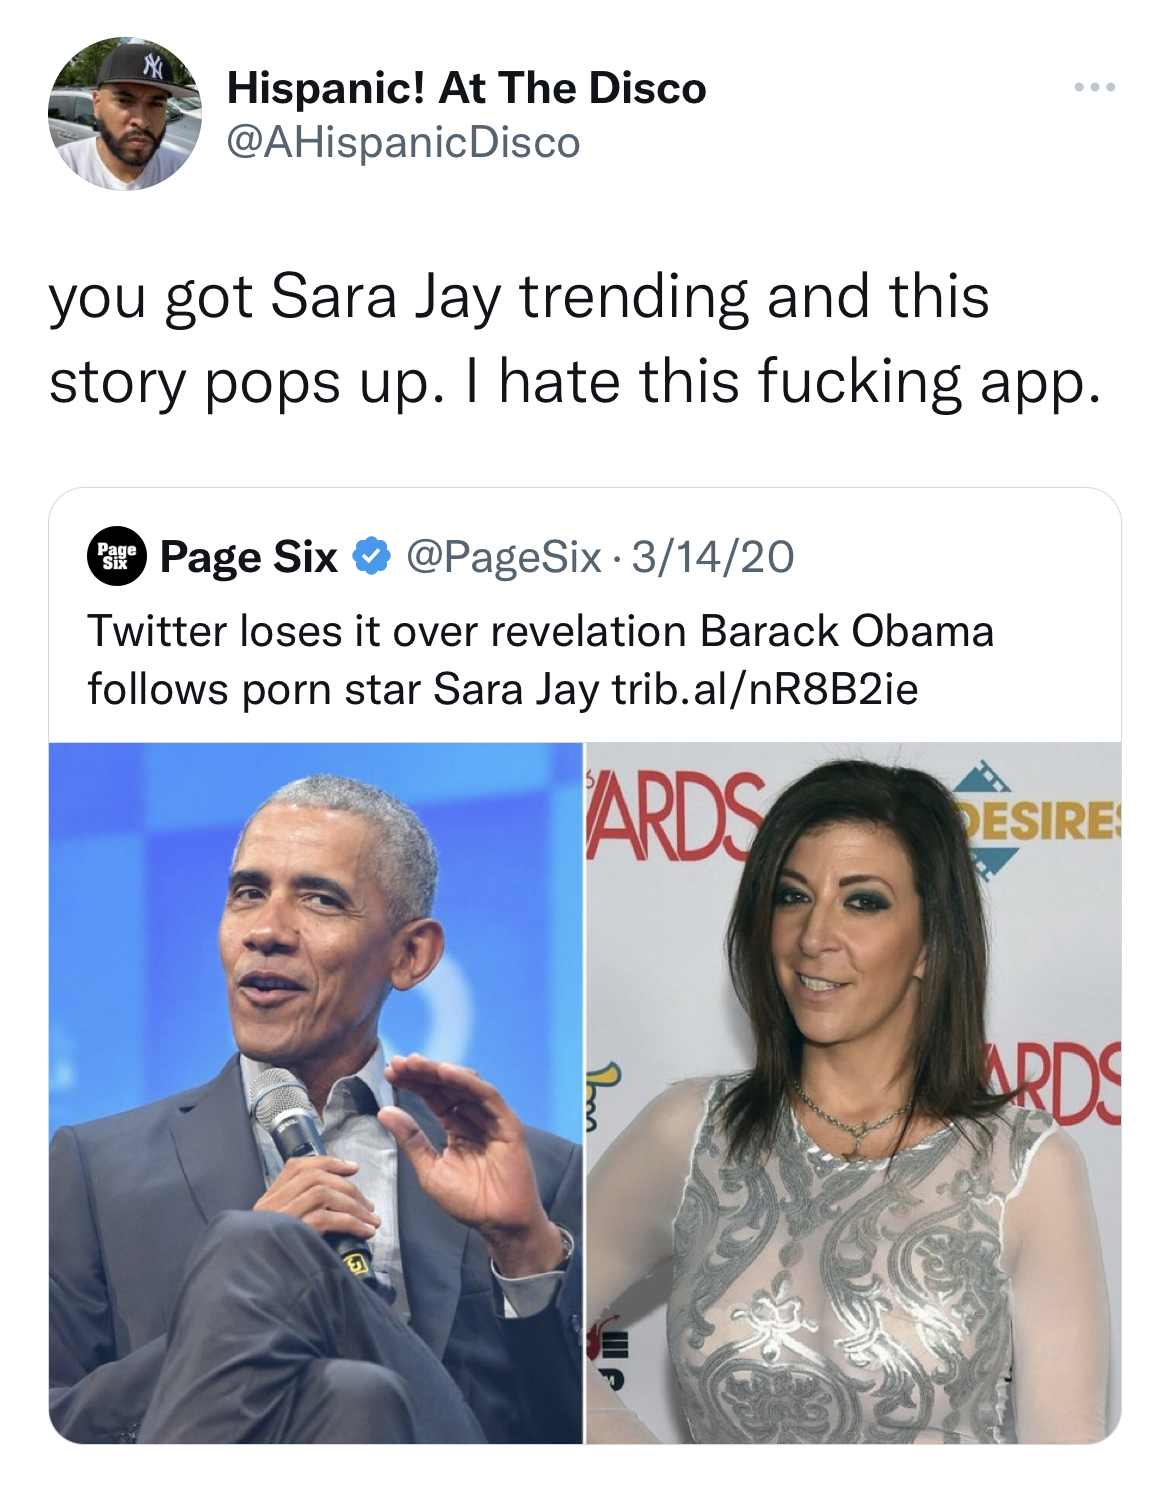 Tweets dunking on celebs - Hispanic! At The Disco Disco you got Sara Jay trending and this story pops up. I hate this fucking app. Page Six 31420 Twitter loses it over revelation Barack Obama s porn star Sara Jay trib.alnR8B2ie Ards Inn Desire Ards